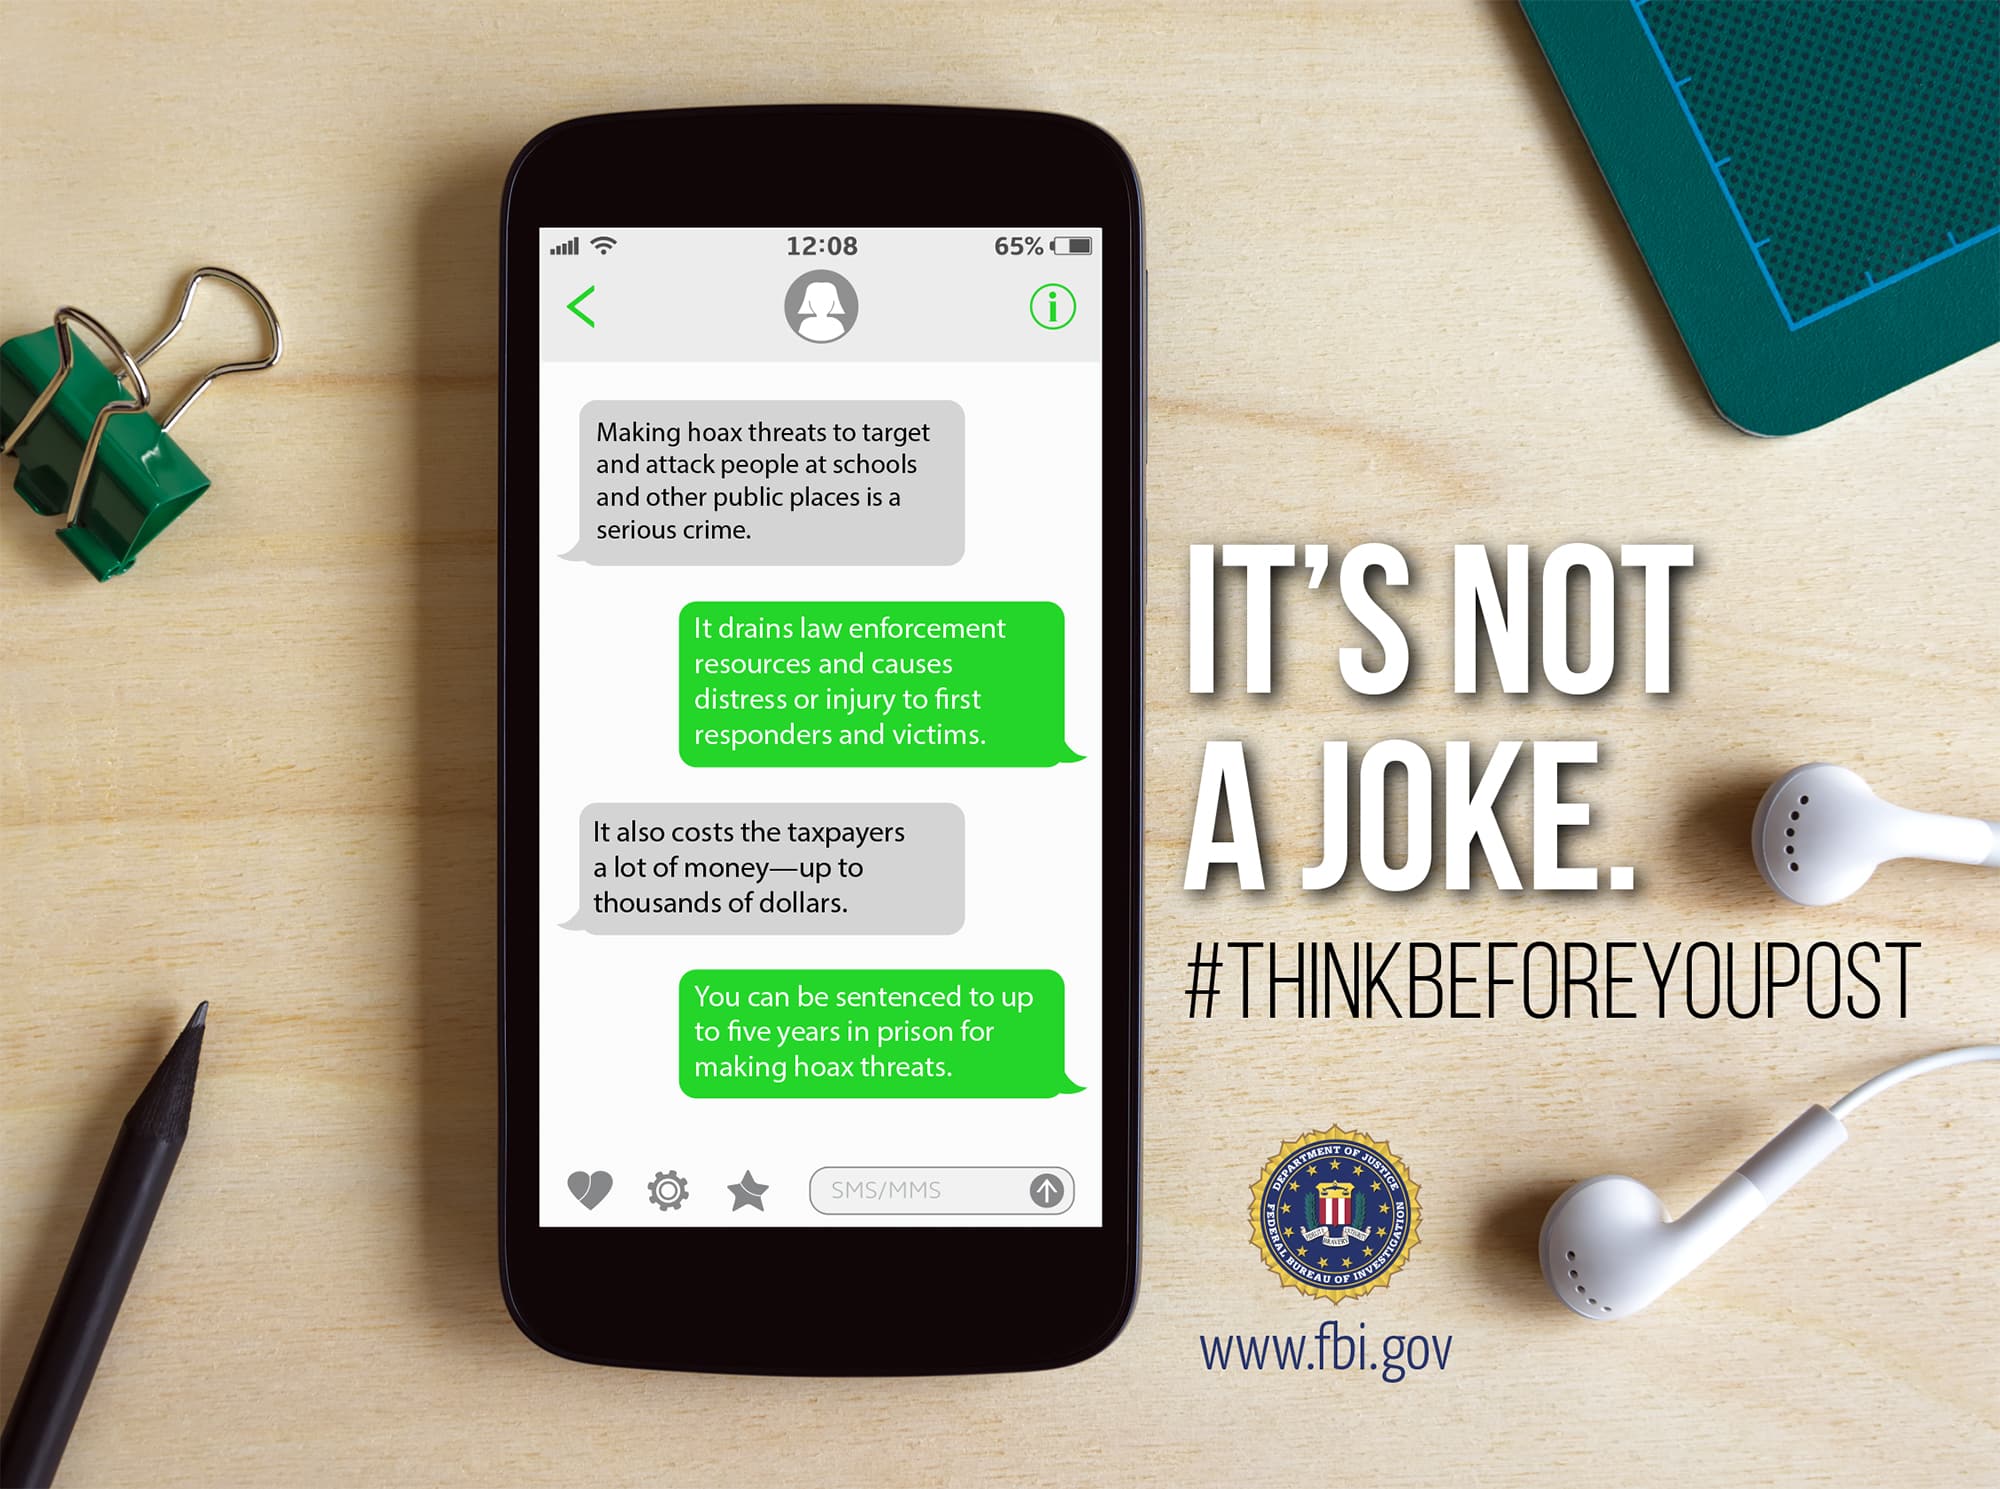 The FBI launches a national campaign #ThinkBeforeYouPost